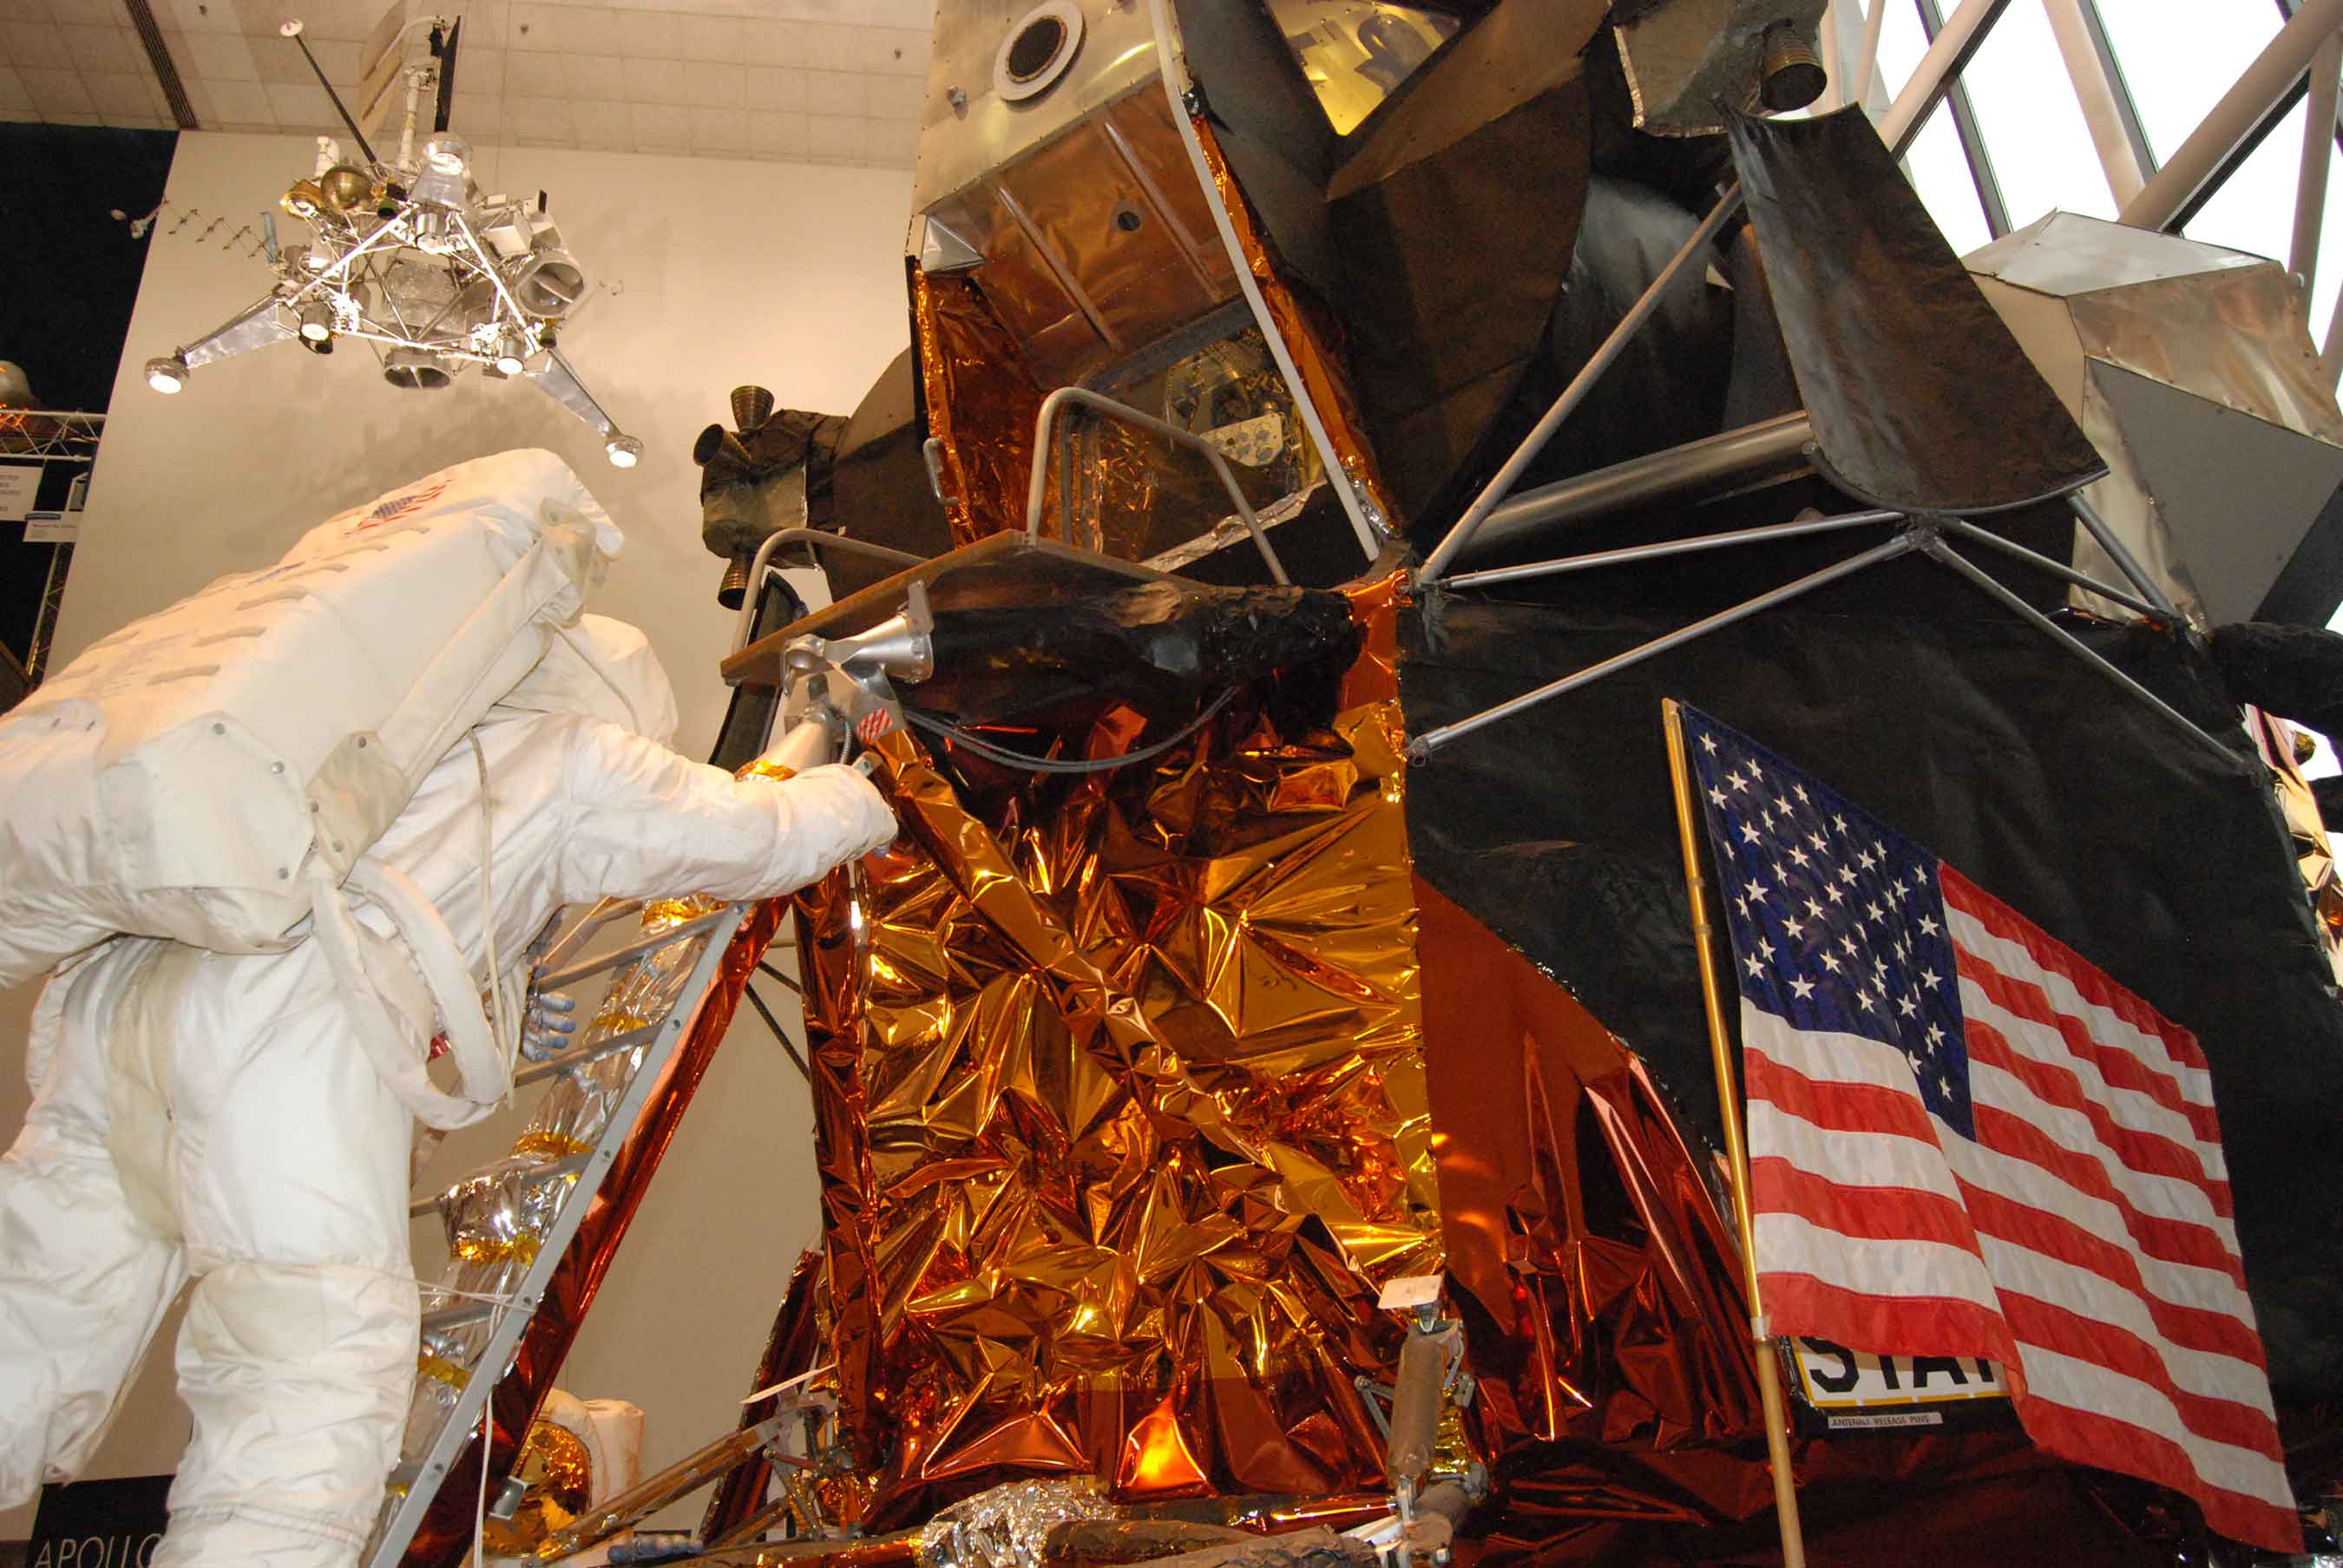 TripAdvisor named the Smithsonian National Air and Space Museum in Washington, D.C. among the top 10 space-themed attractions in the U.S. (A TripAdvisor traveler photo)